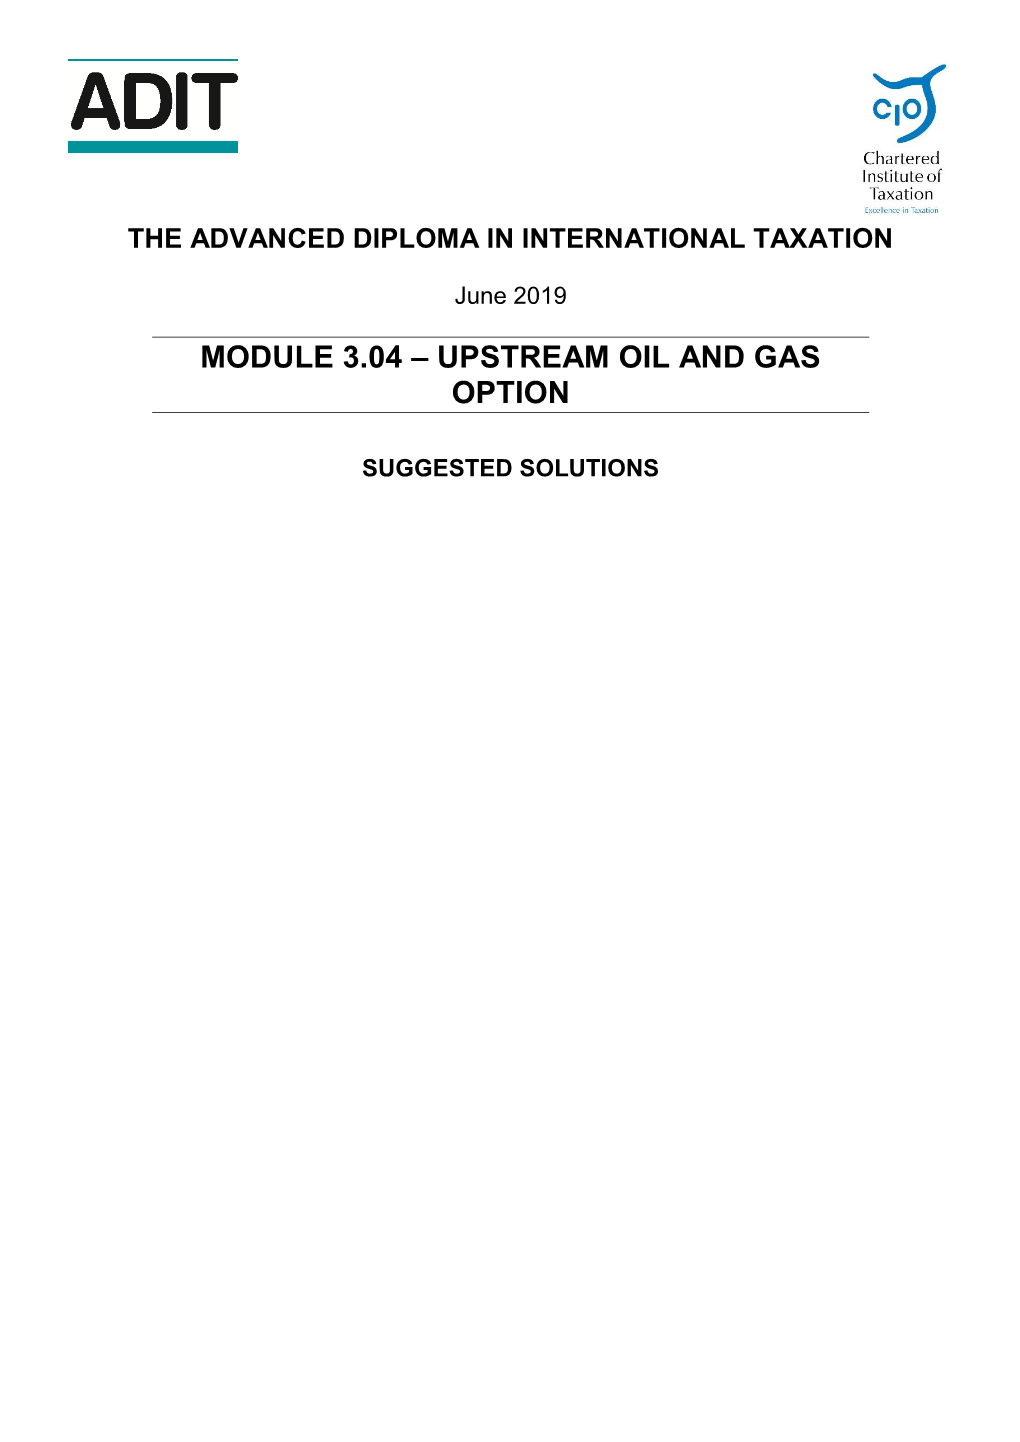 Module 3.04 – Upstream Oil and Gas Option